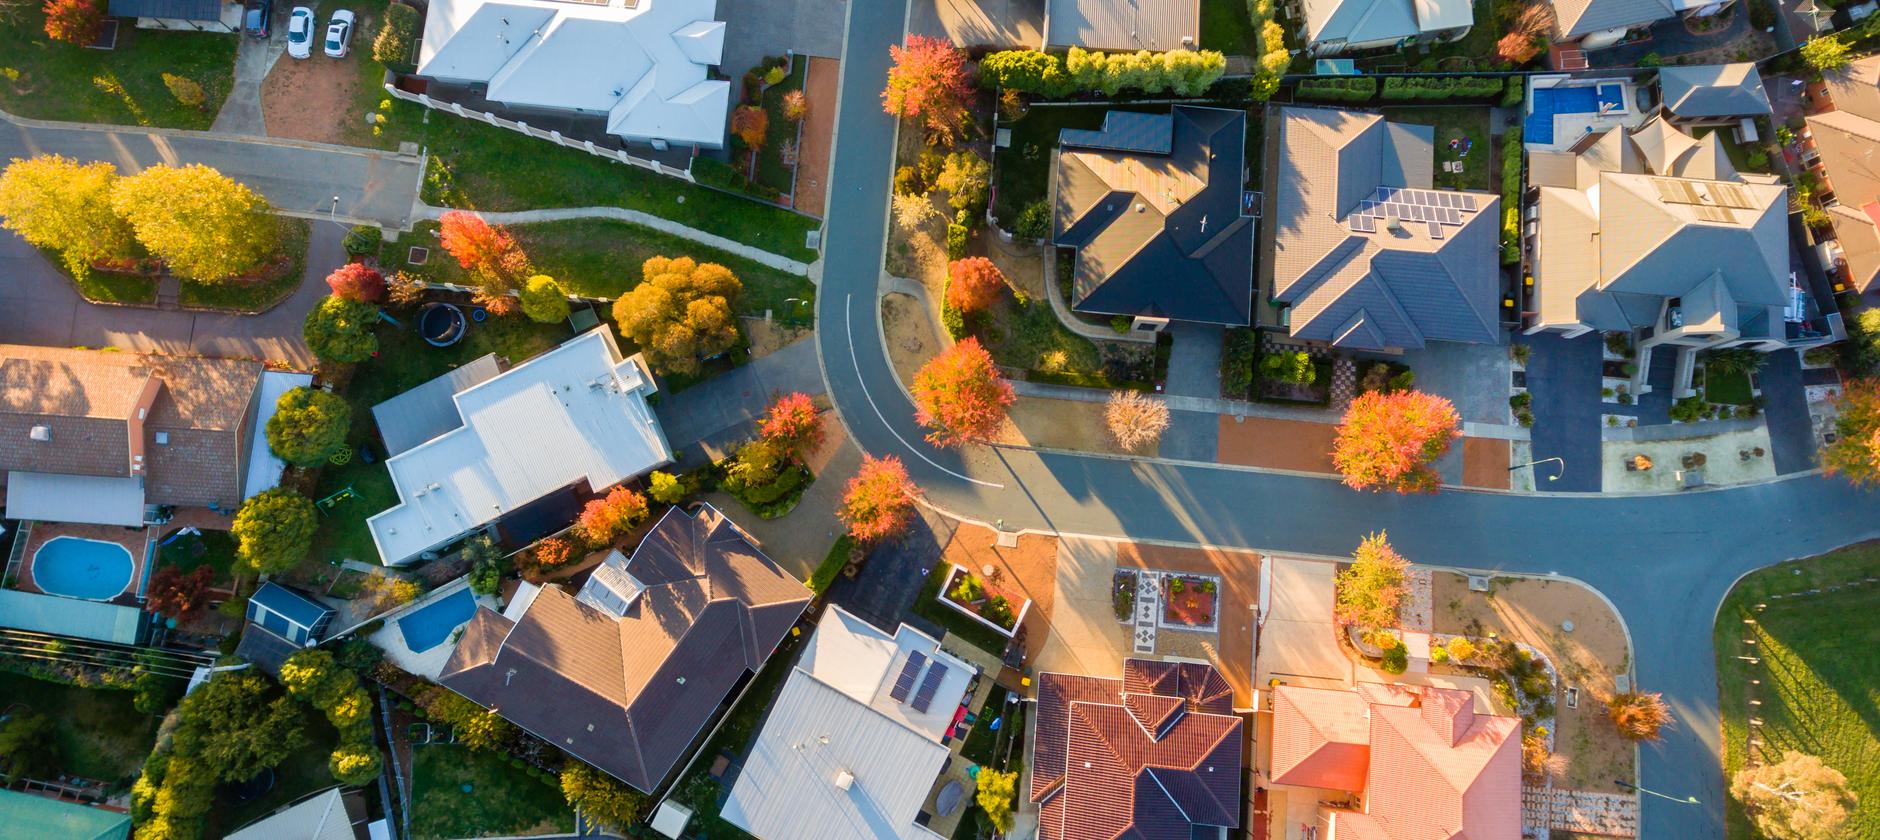 Rising prices and resilience; Australia’s winter housing outlook